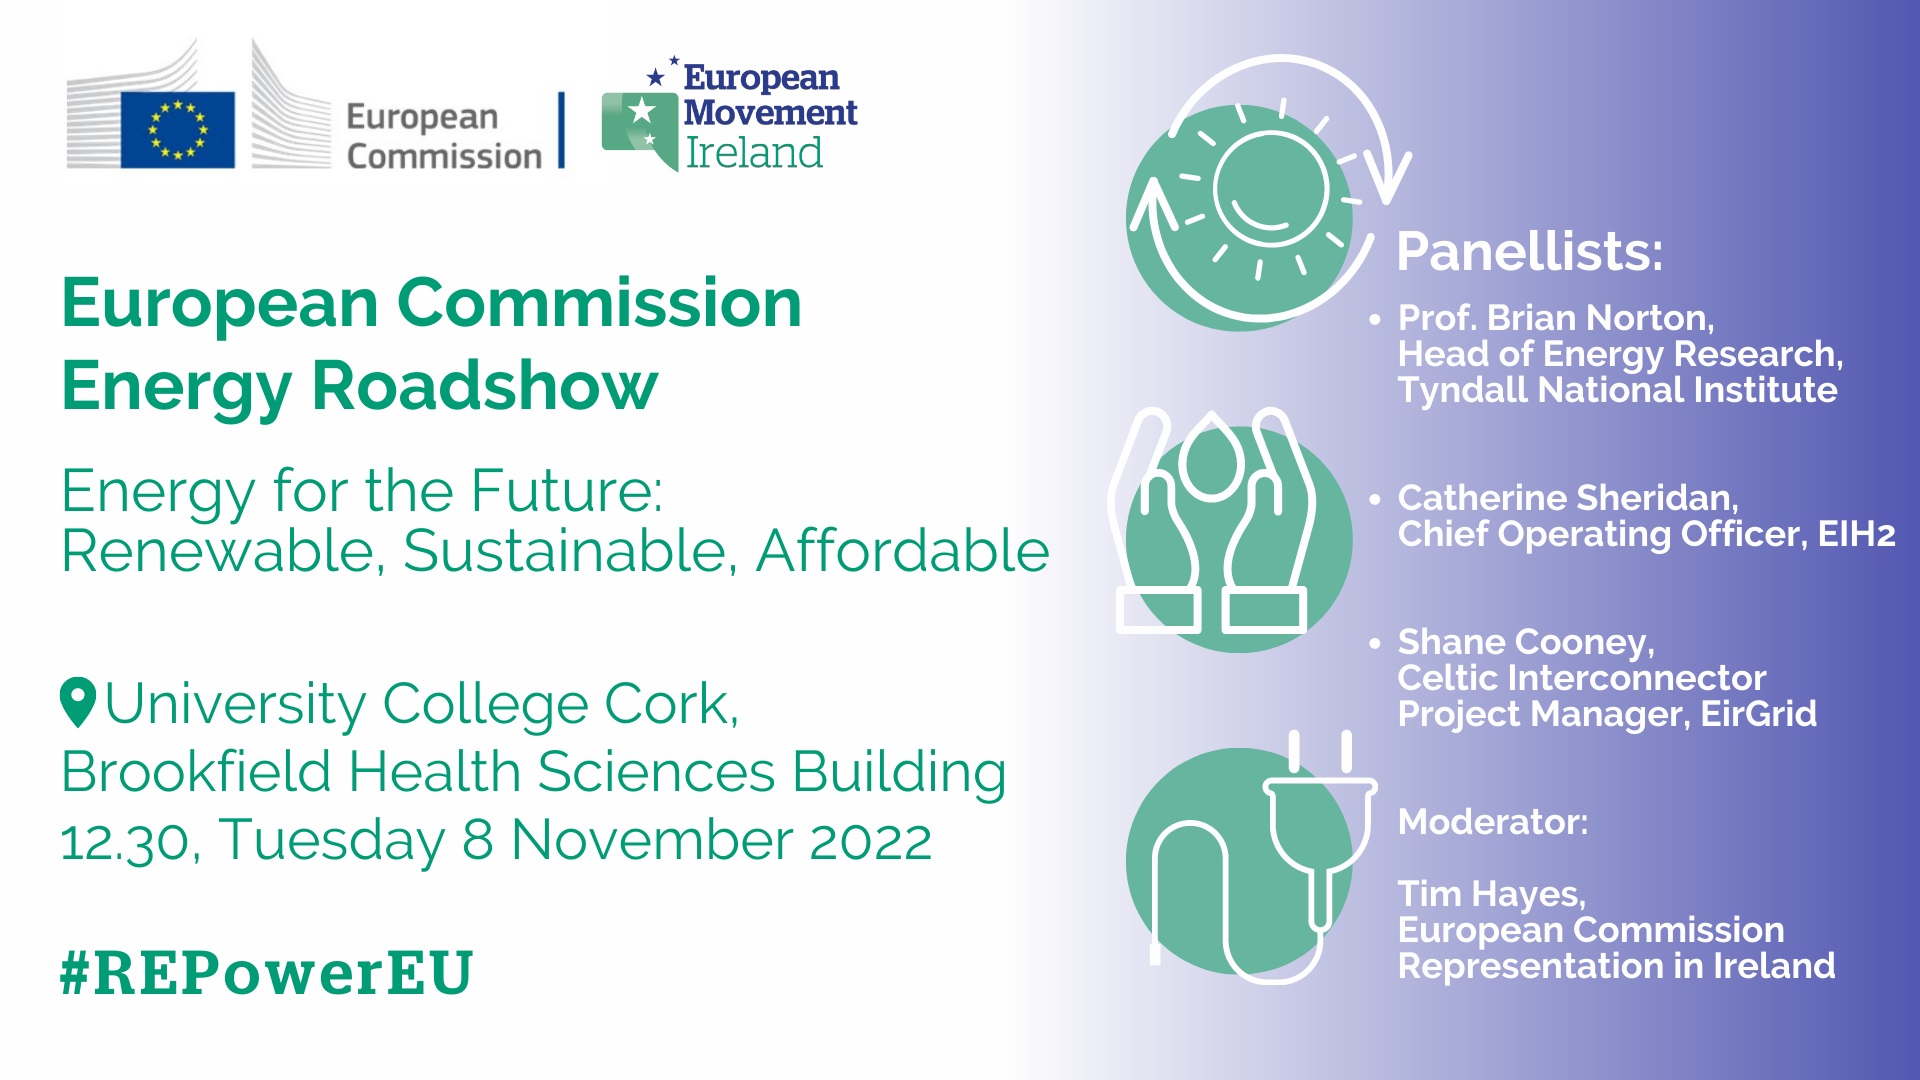 Image promoting our event on Energy for the Future in UCC on 8 November 2022 